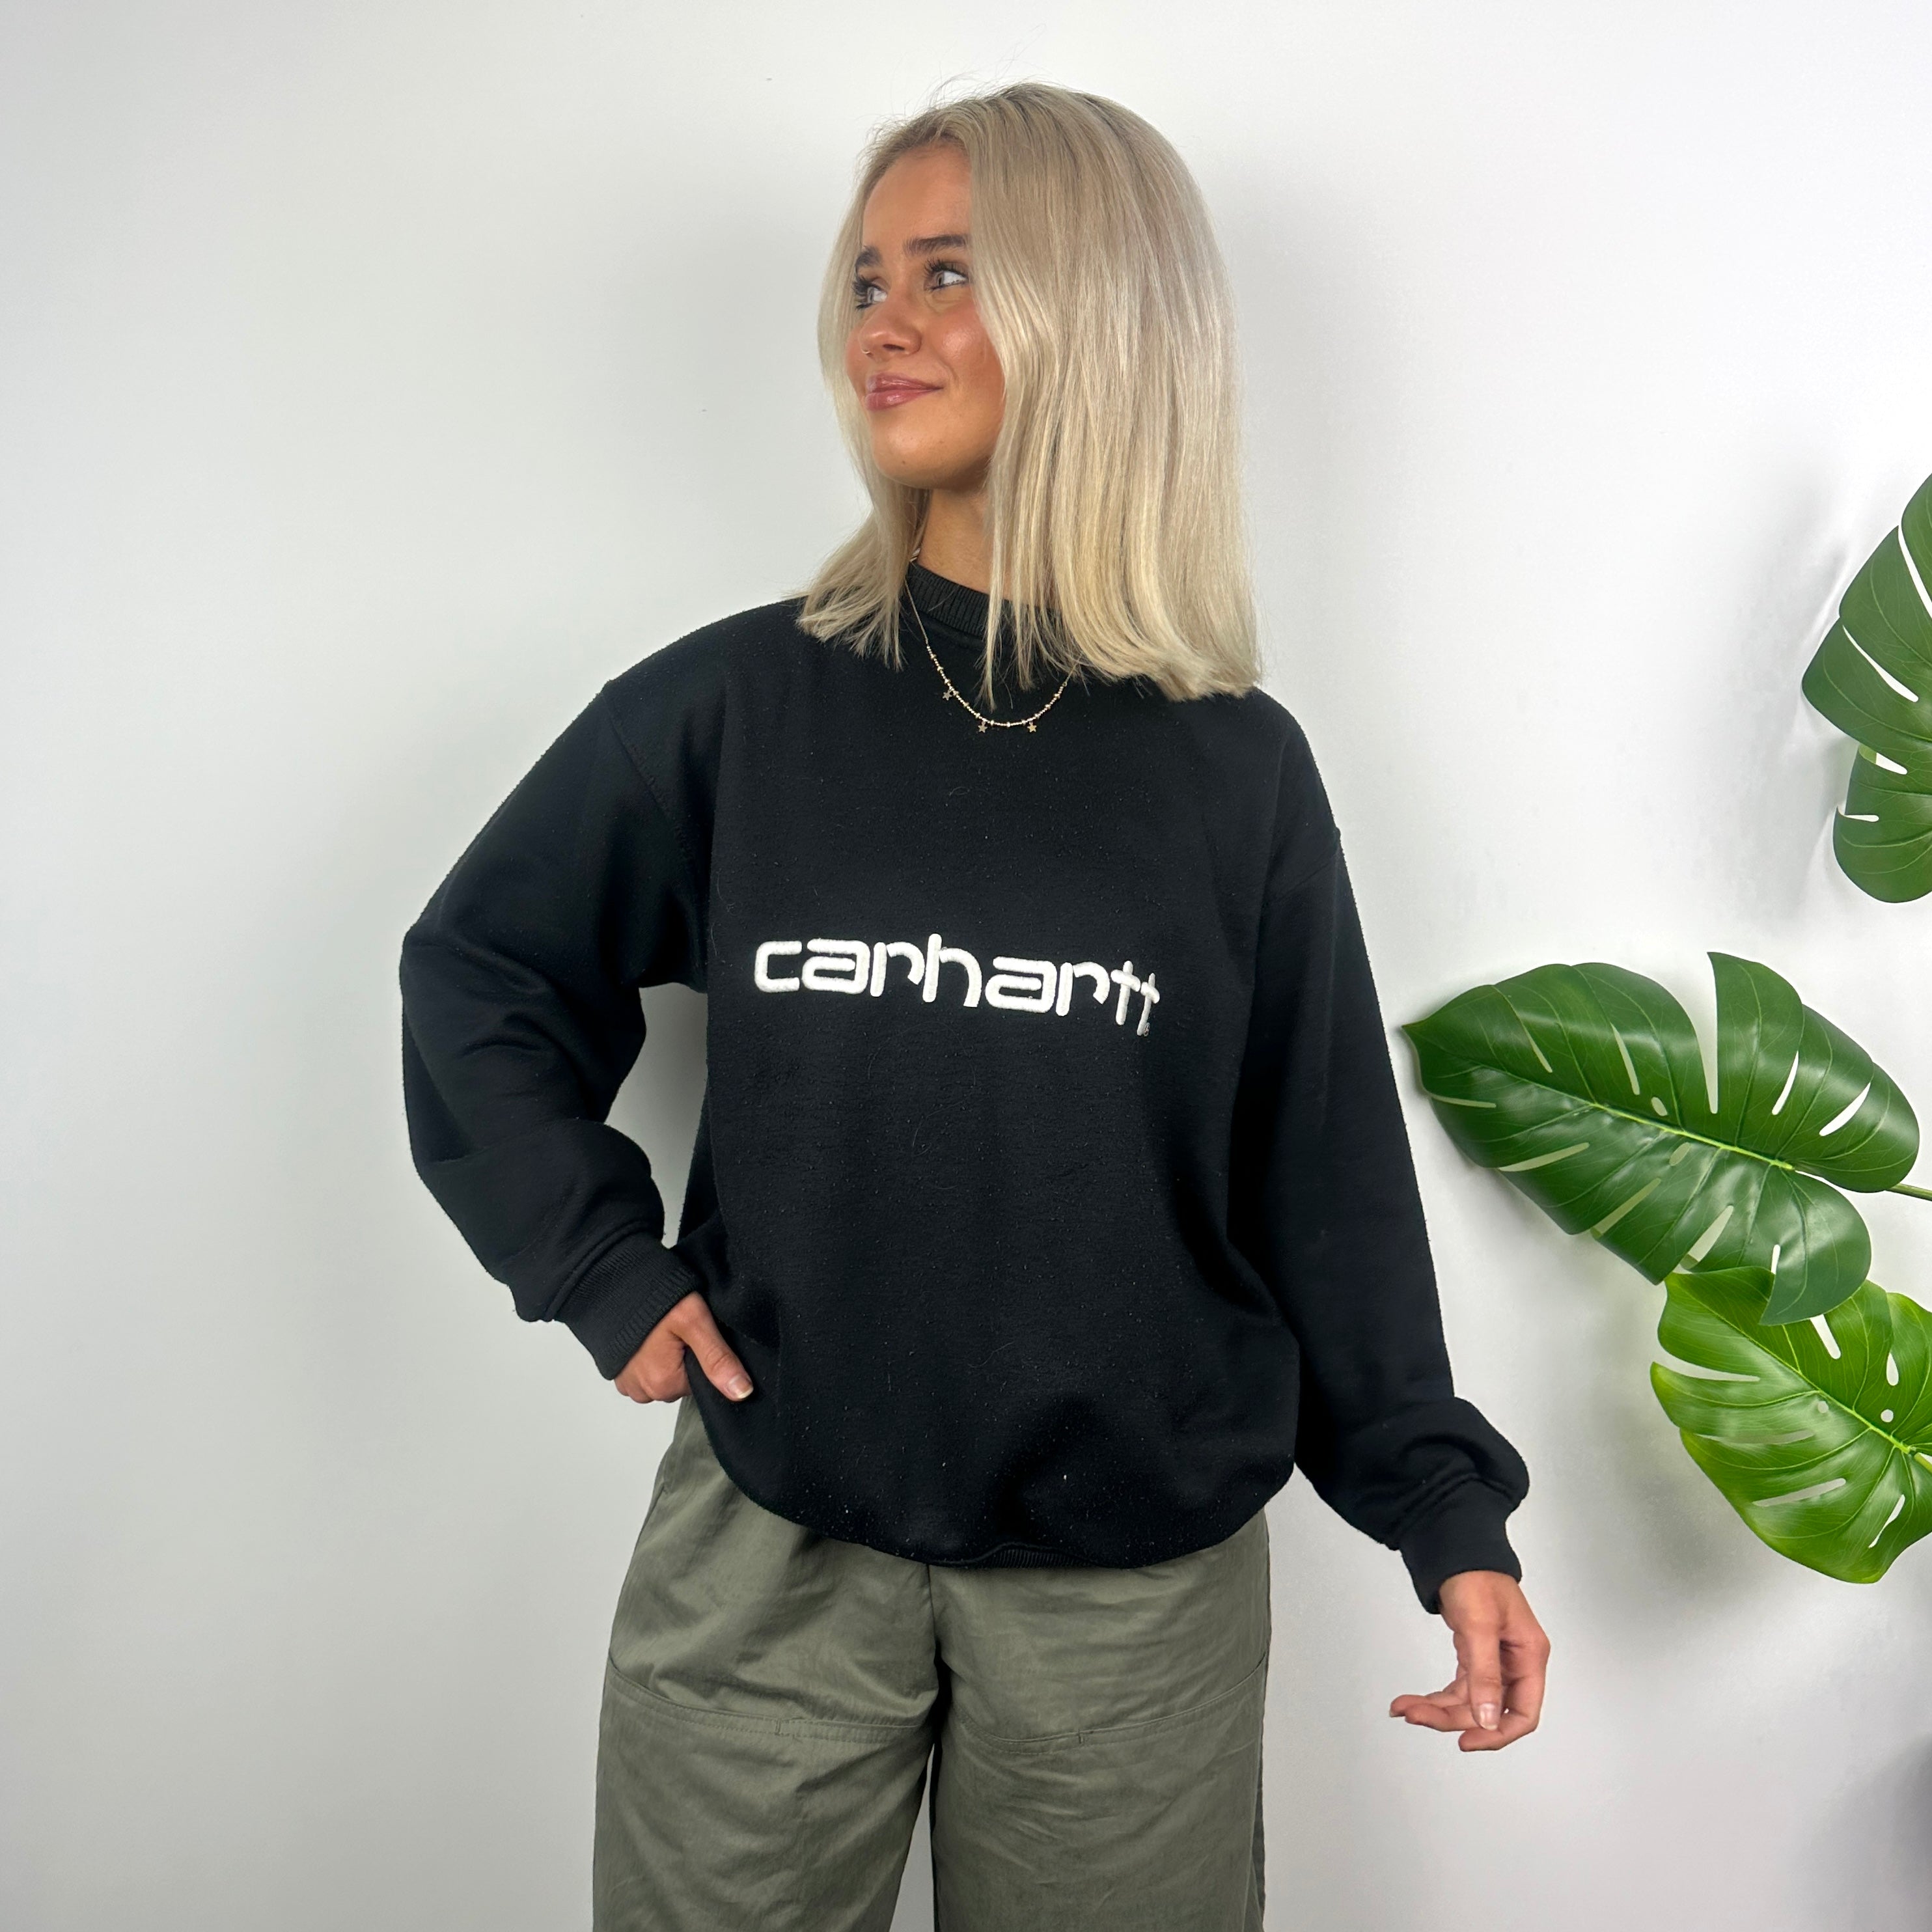 Carhartt Black Embroidered Spell Out Sweatshirt (M)